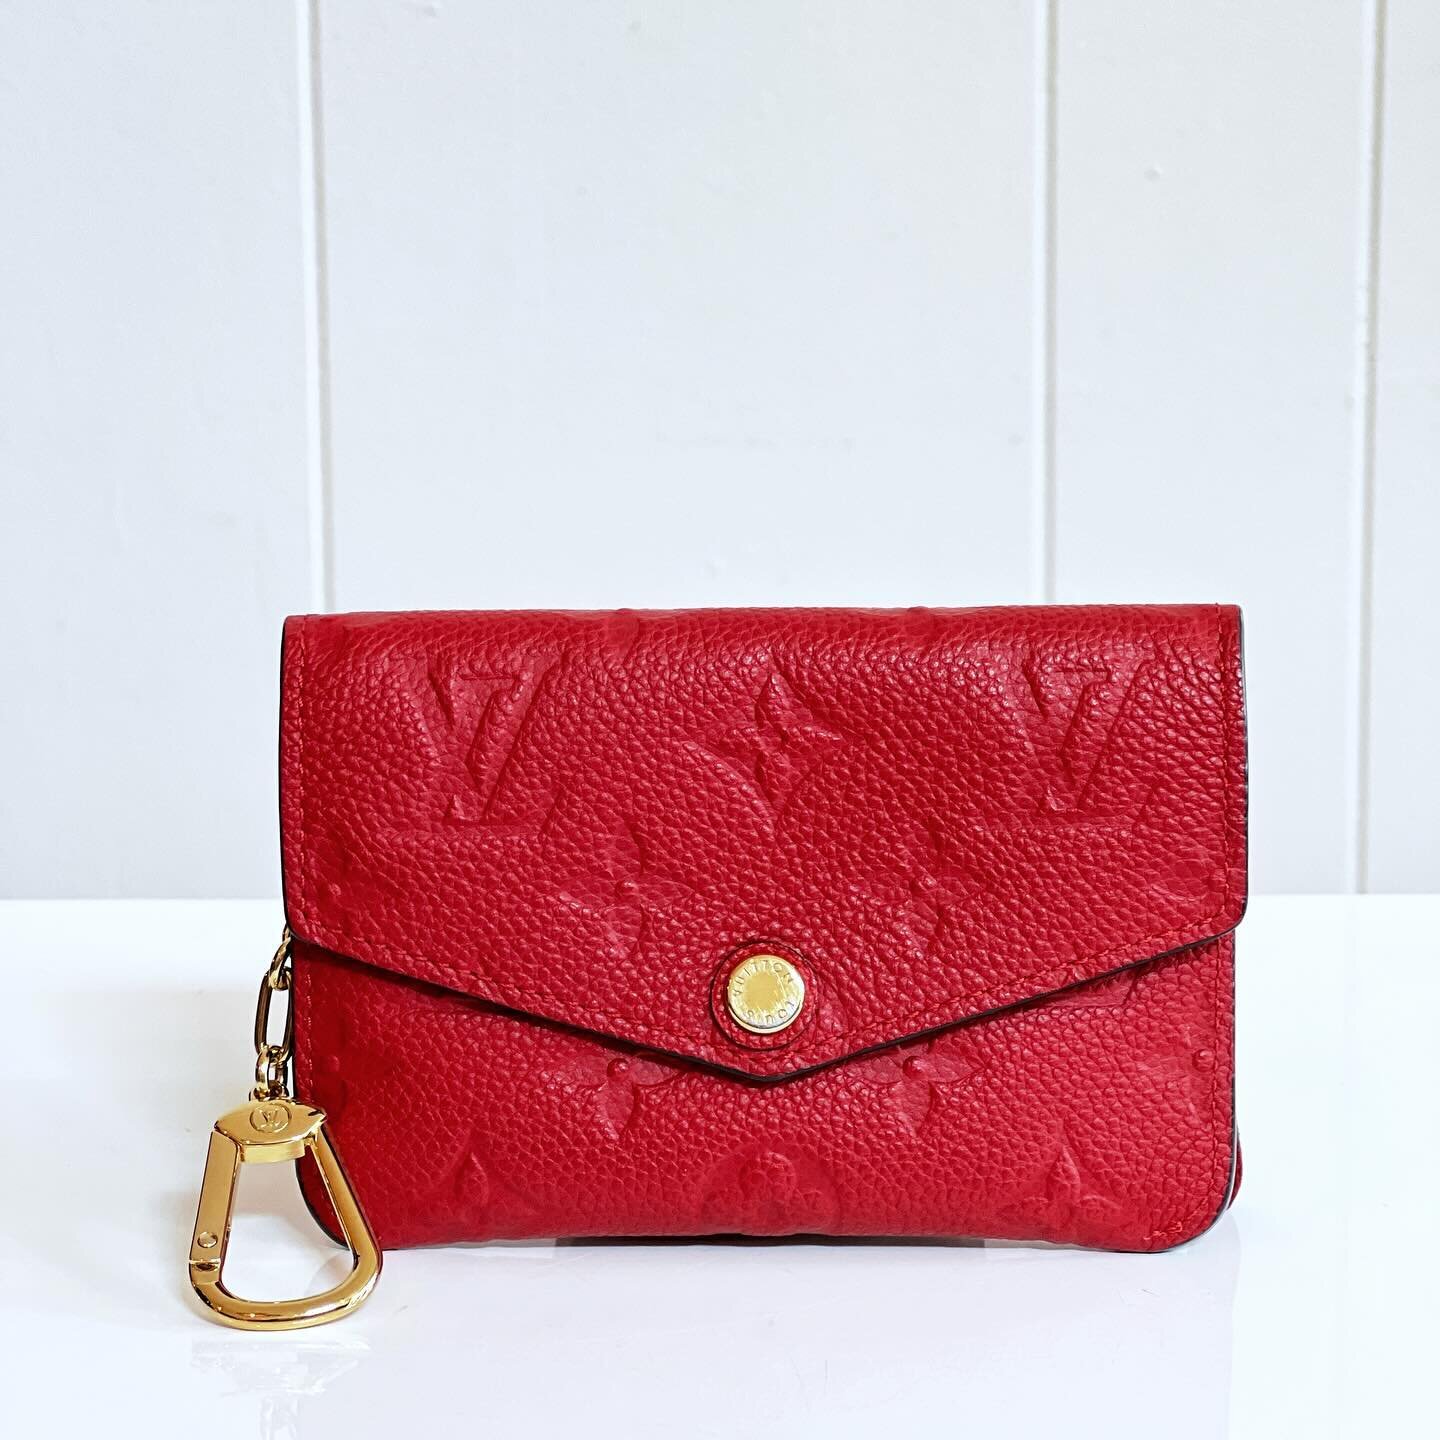 Shop online and pick up in time for Valentine&rsquo;s Day!
This Louis Vuitton Pochette Cles Empreint would make the perfect gift!
.
.
.
#shopsmall #shoplocal #Connecticut #shopconsignment #guilfordct #womenownedbusiness #marijaneboutique #connecticut